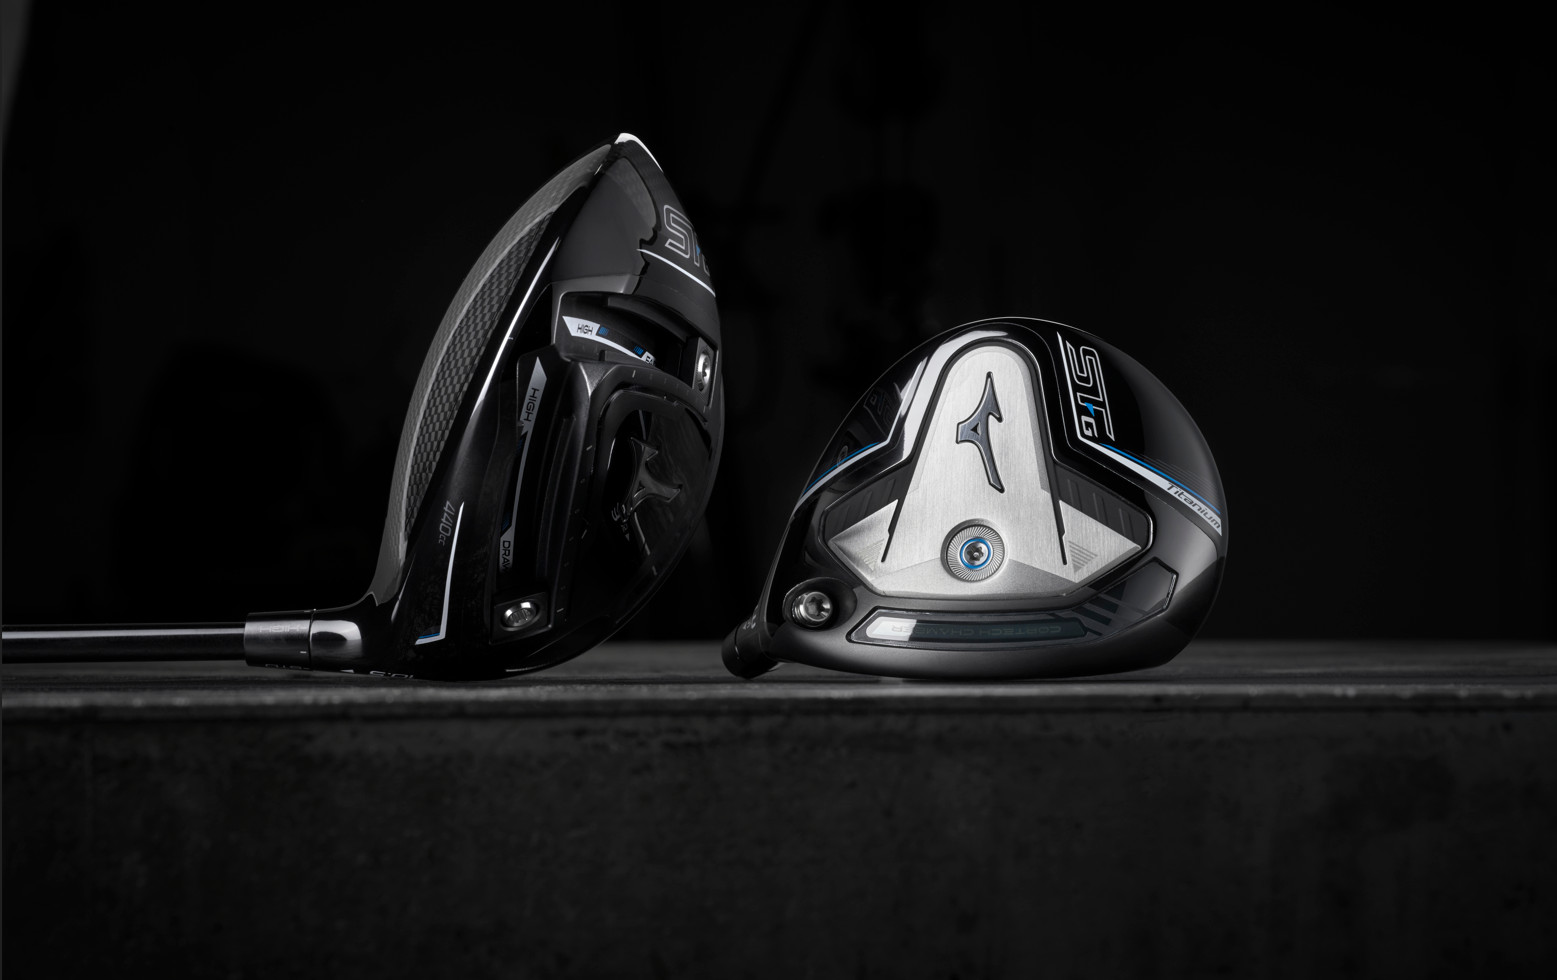 Unique, but not lacking performance: Mizuno's new ST-G Driver and Fairway Woods